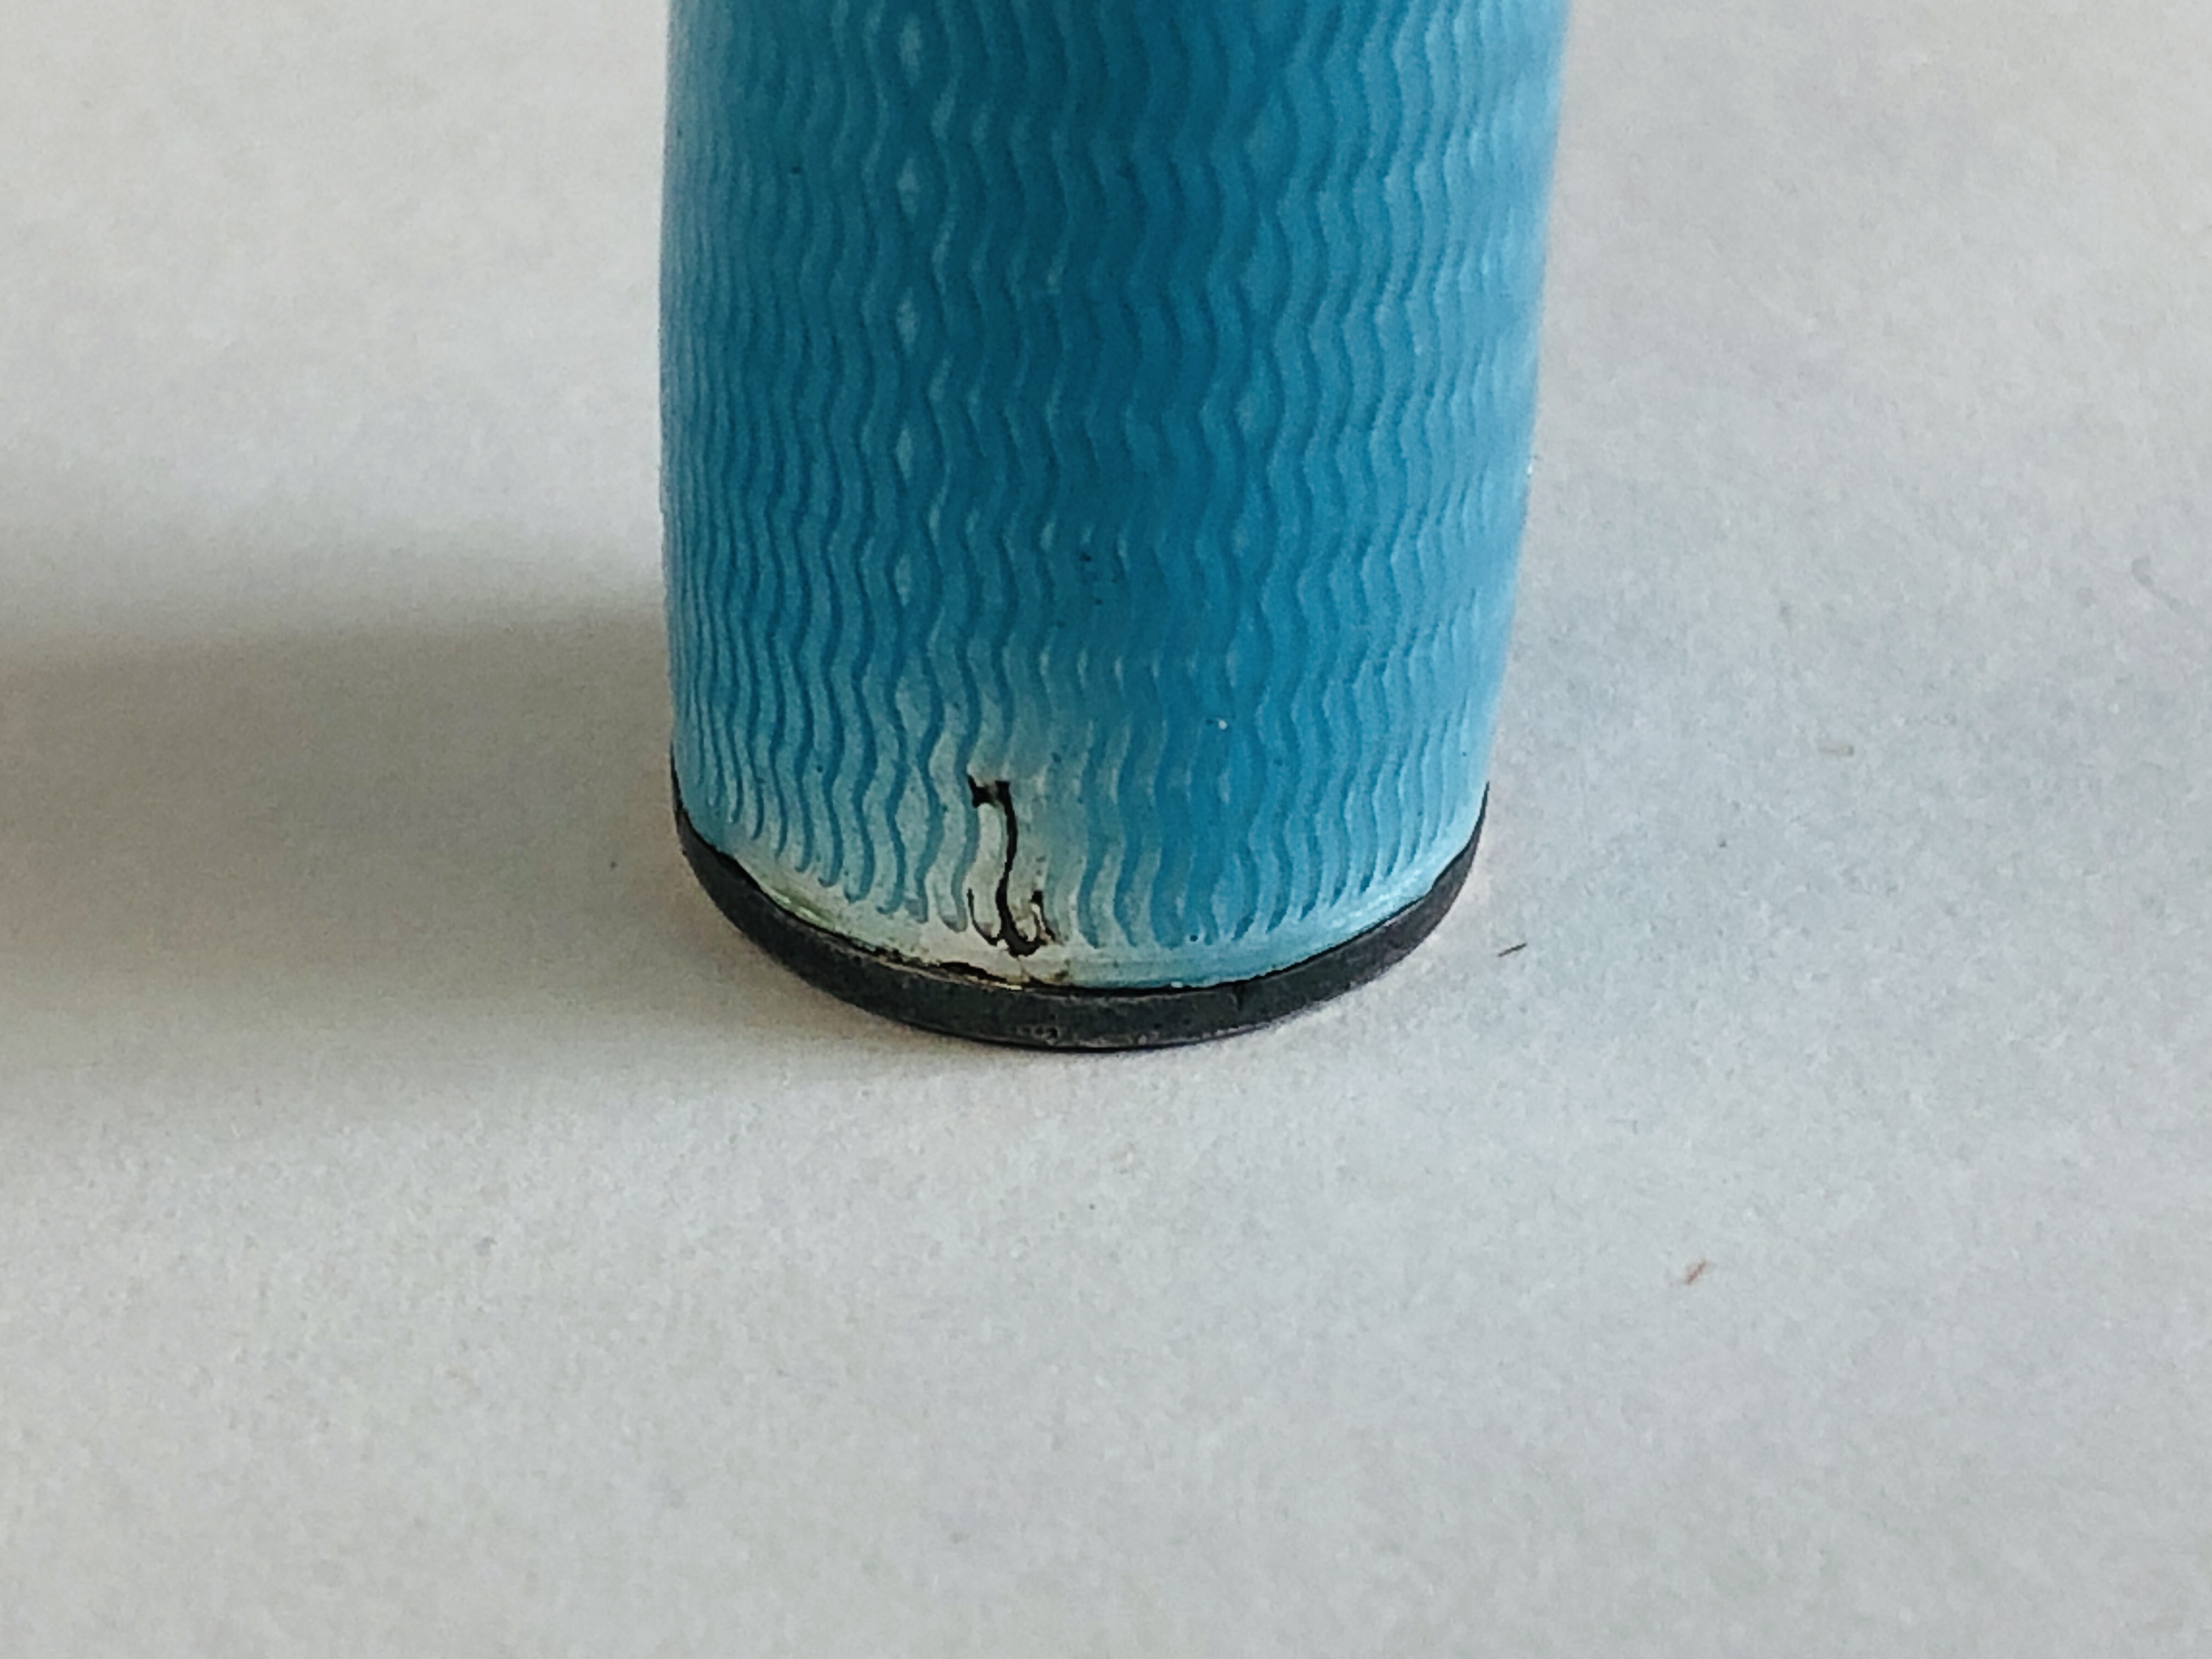 A VINTAGE ENAMELED SILVER CYLINDRICAL THREADED SCENT BOTTLE HOLDER CONTAINING A CLEAR GLASS SCENT - Image 4 of 7